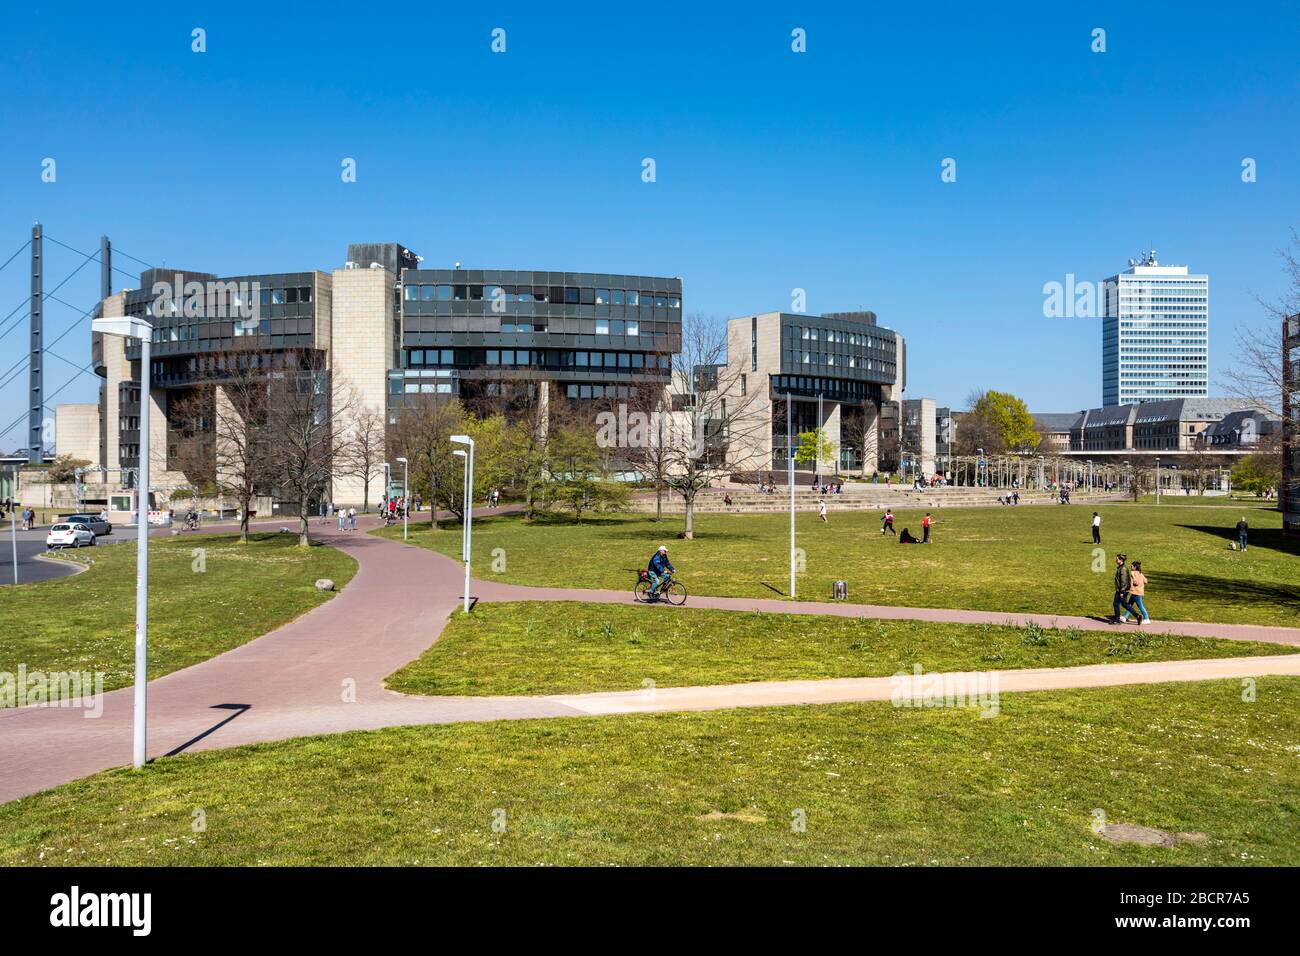 New everyday situation due to coronavirus pandemic. Despite the best spring weather, safety regulations must be observed. City center with statehouse. Stock Photo